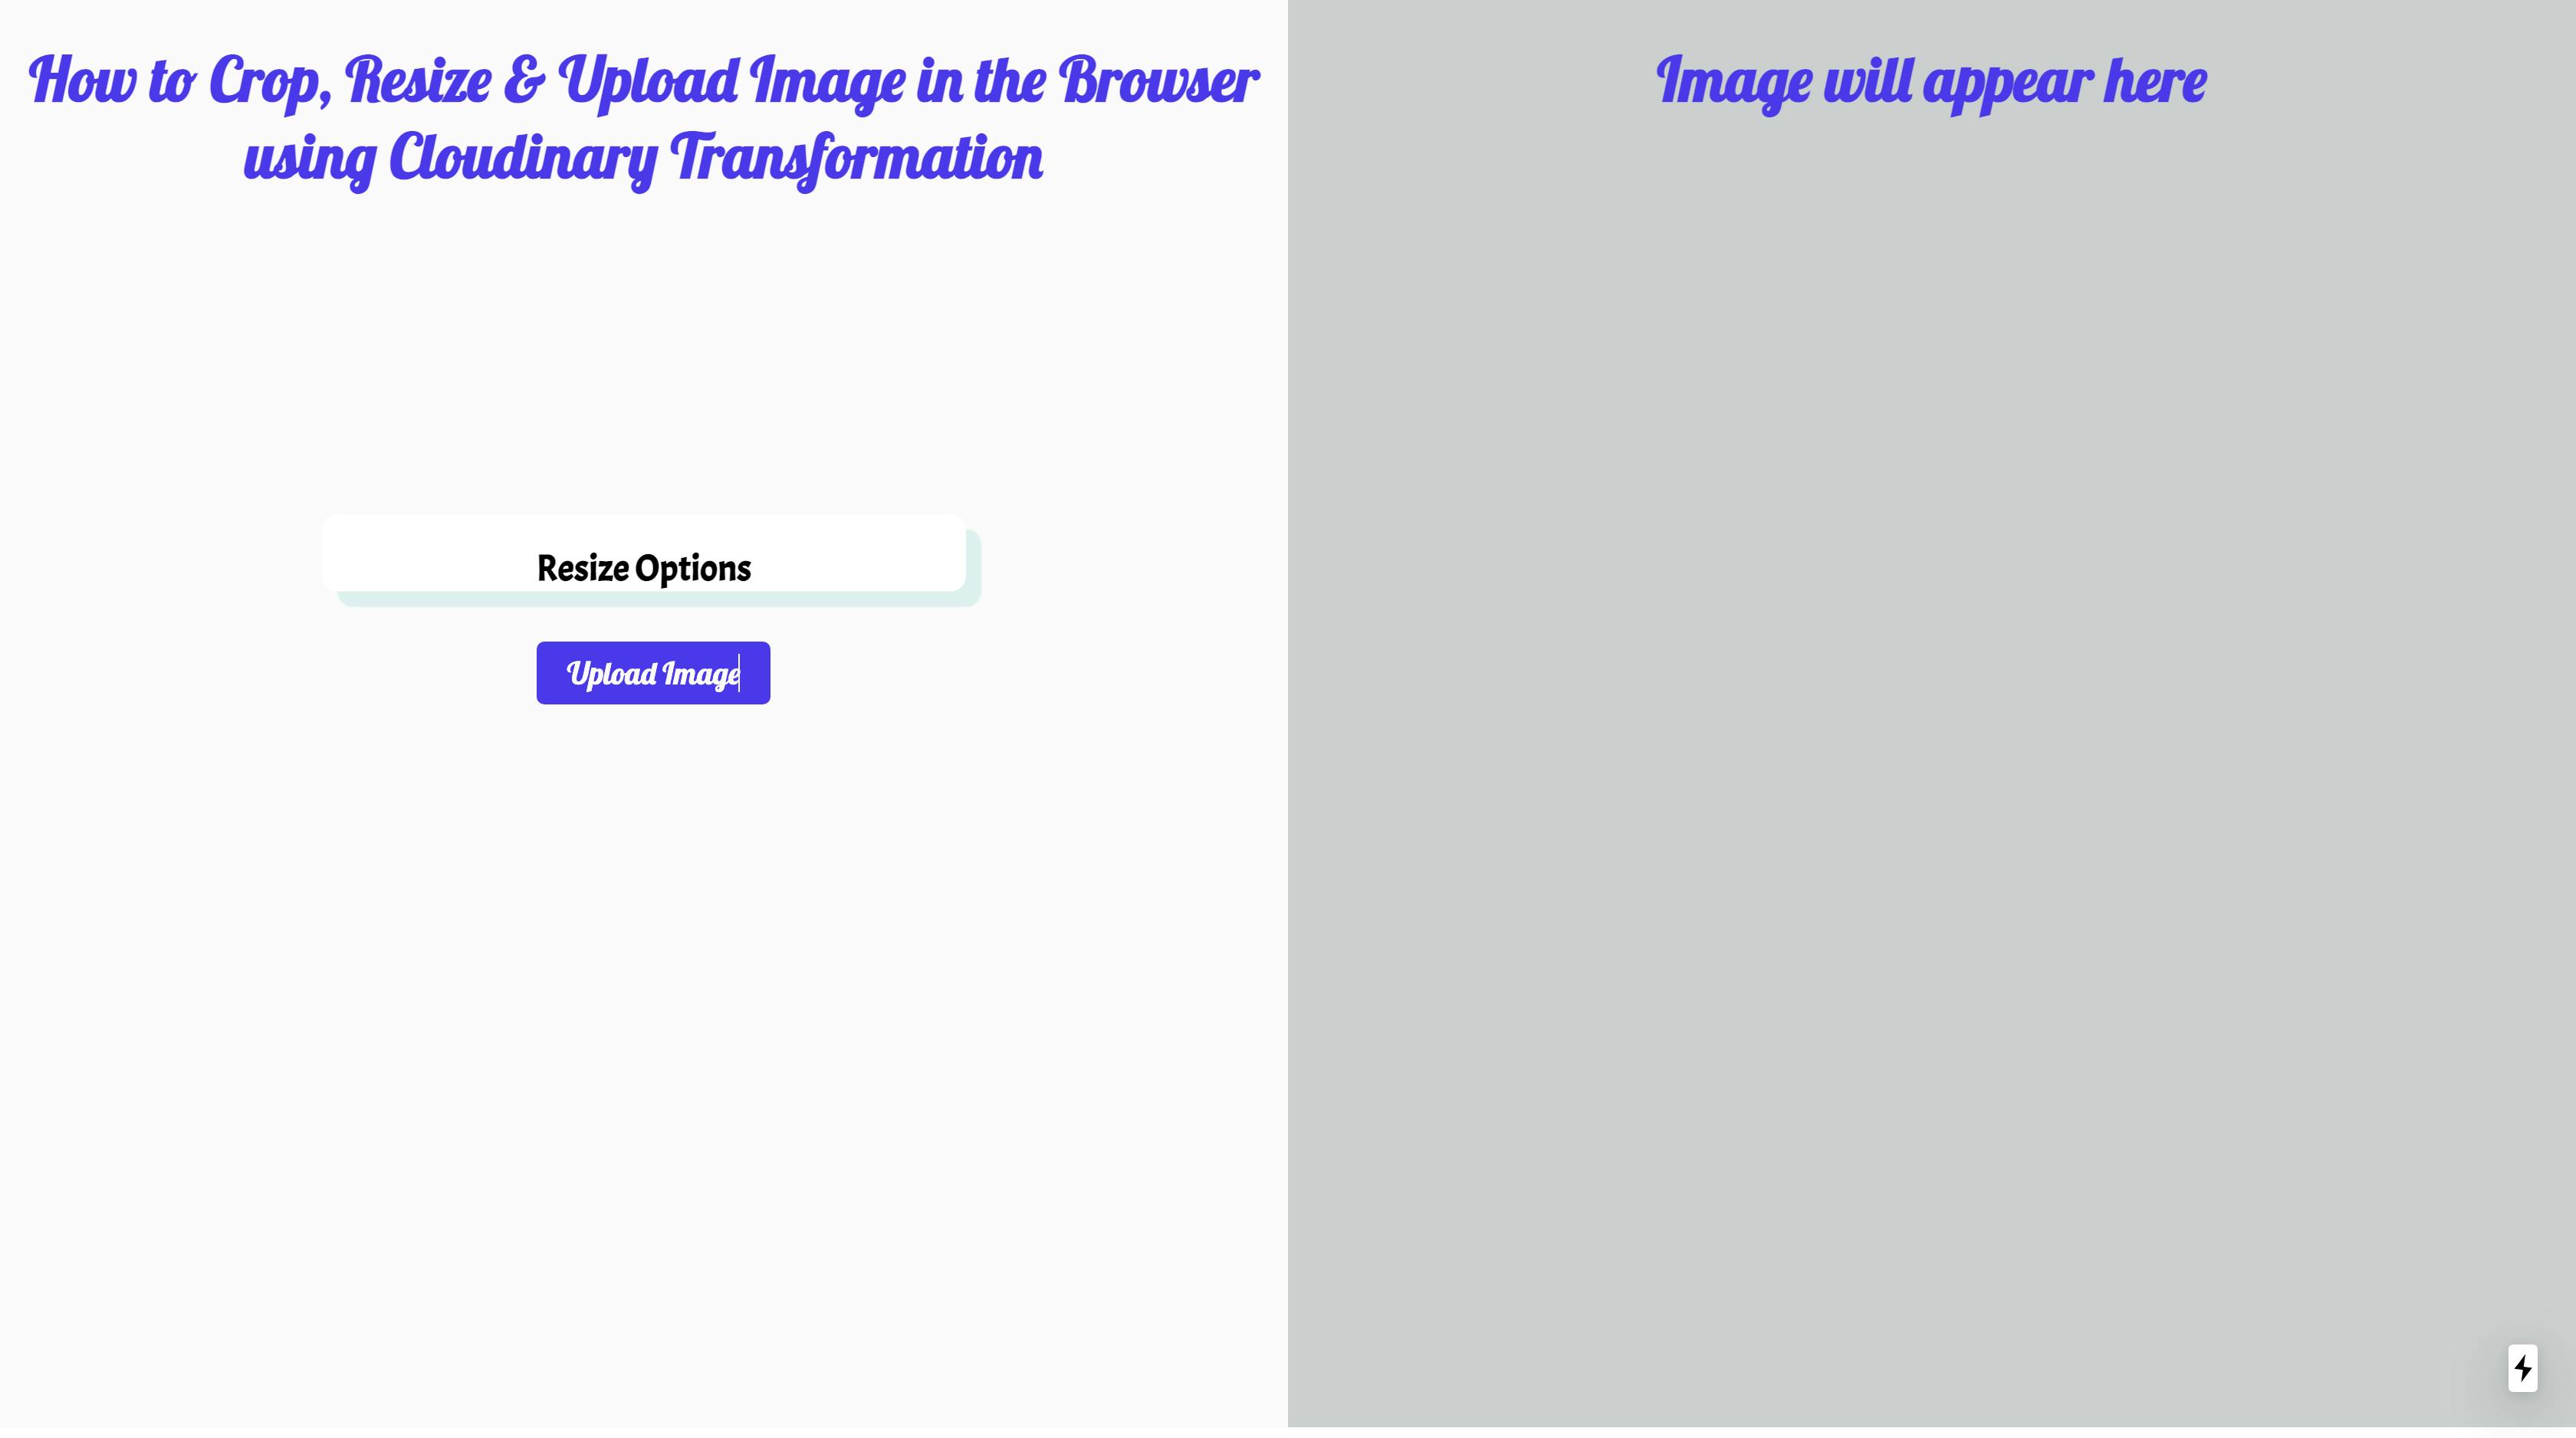 How to Upload, Crop, & Resize Image in the Browser in Next.js